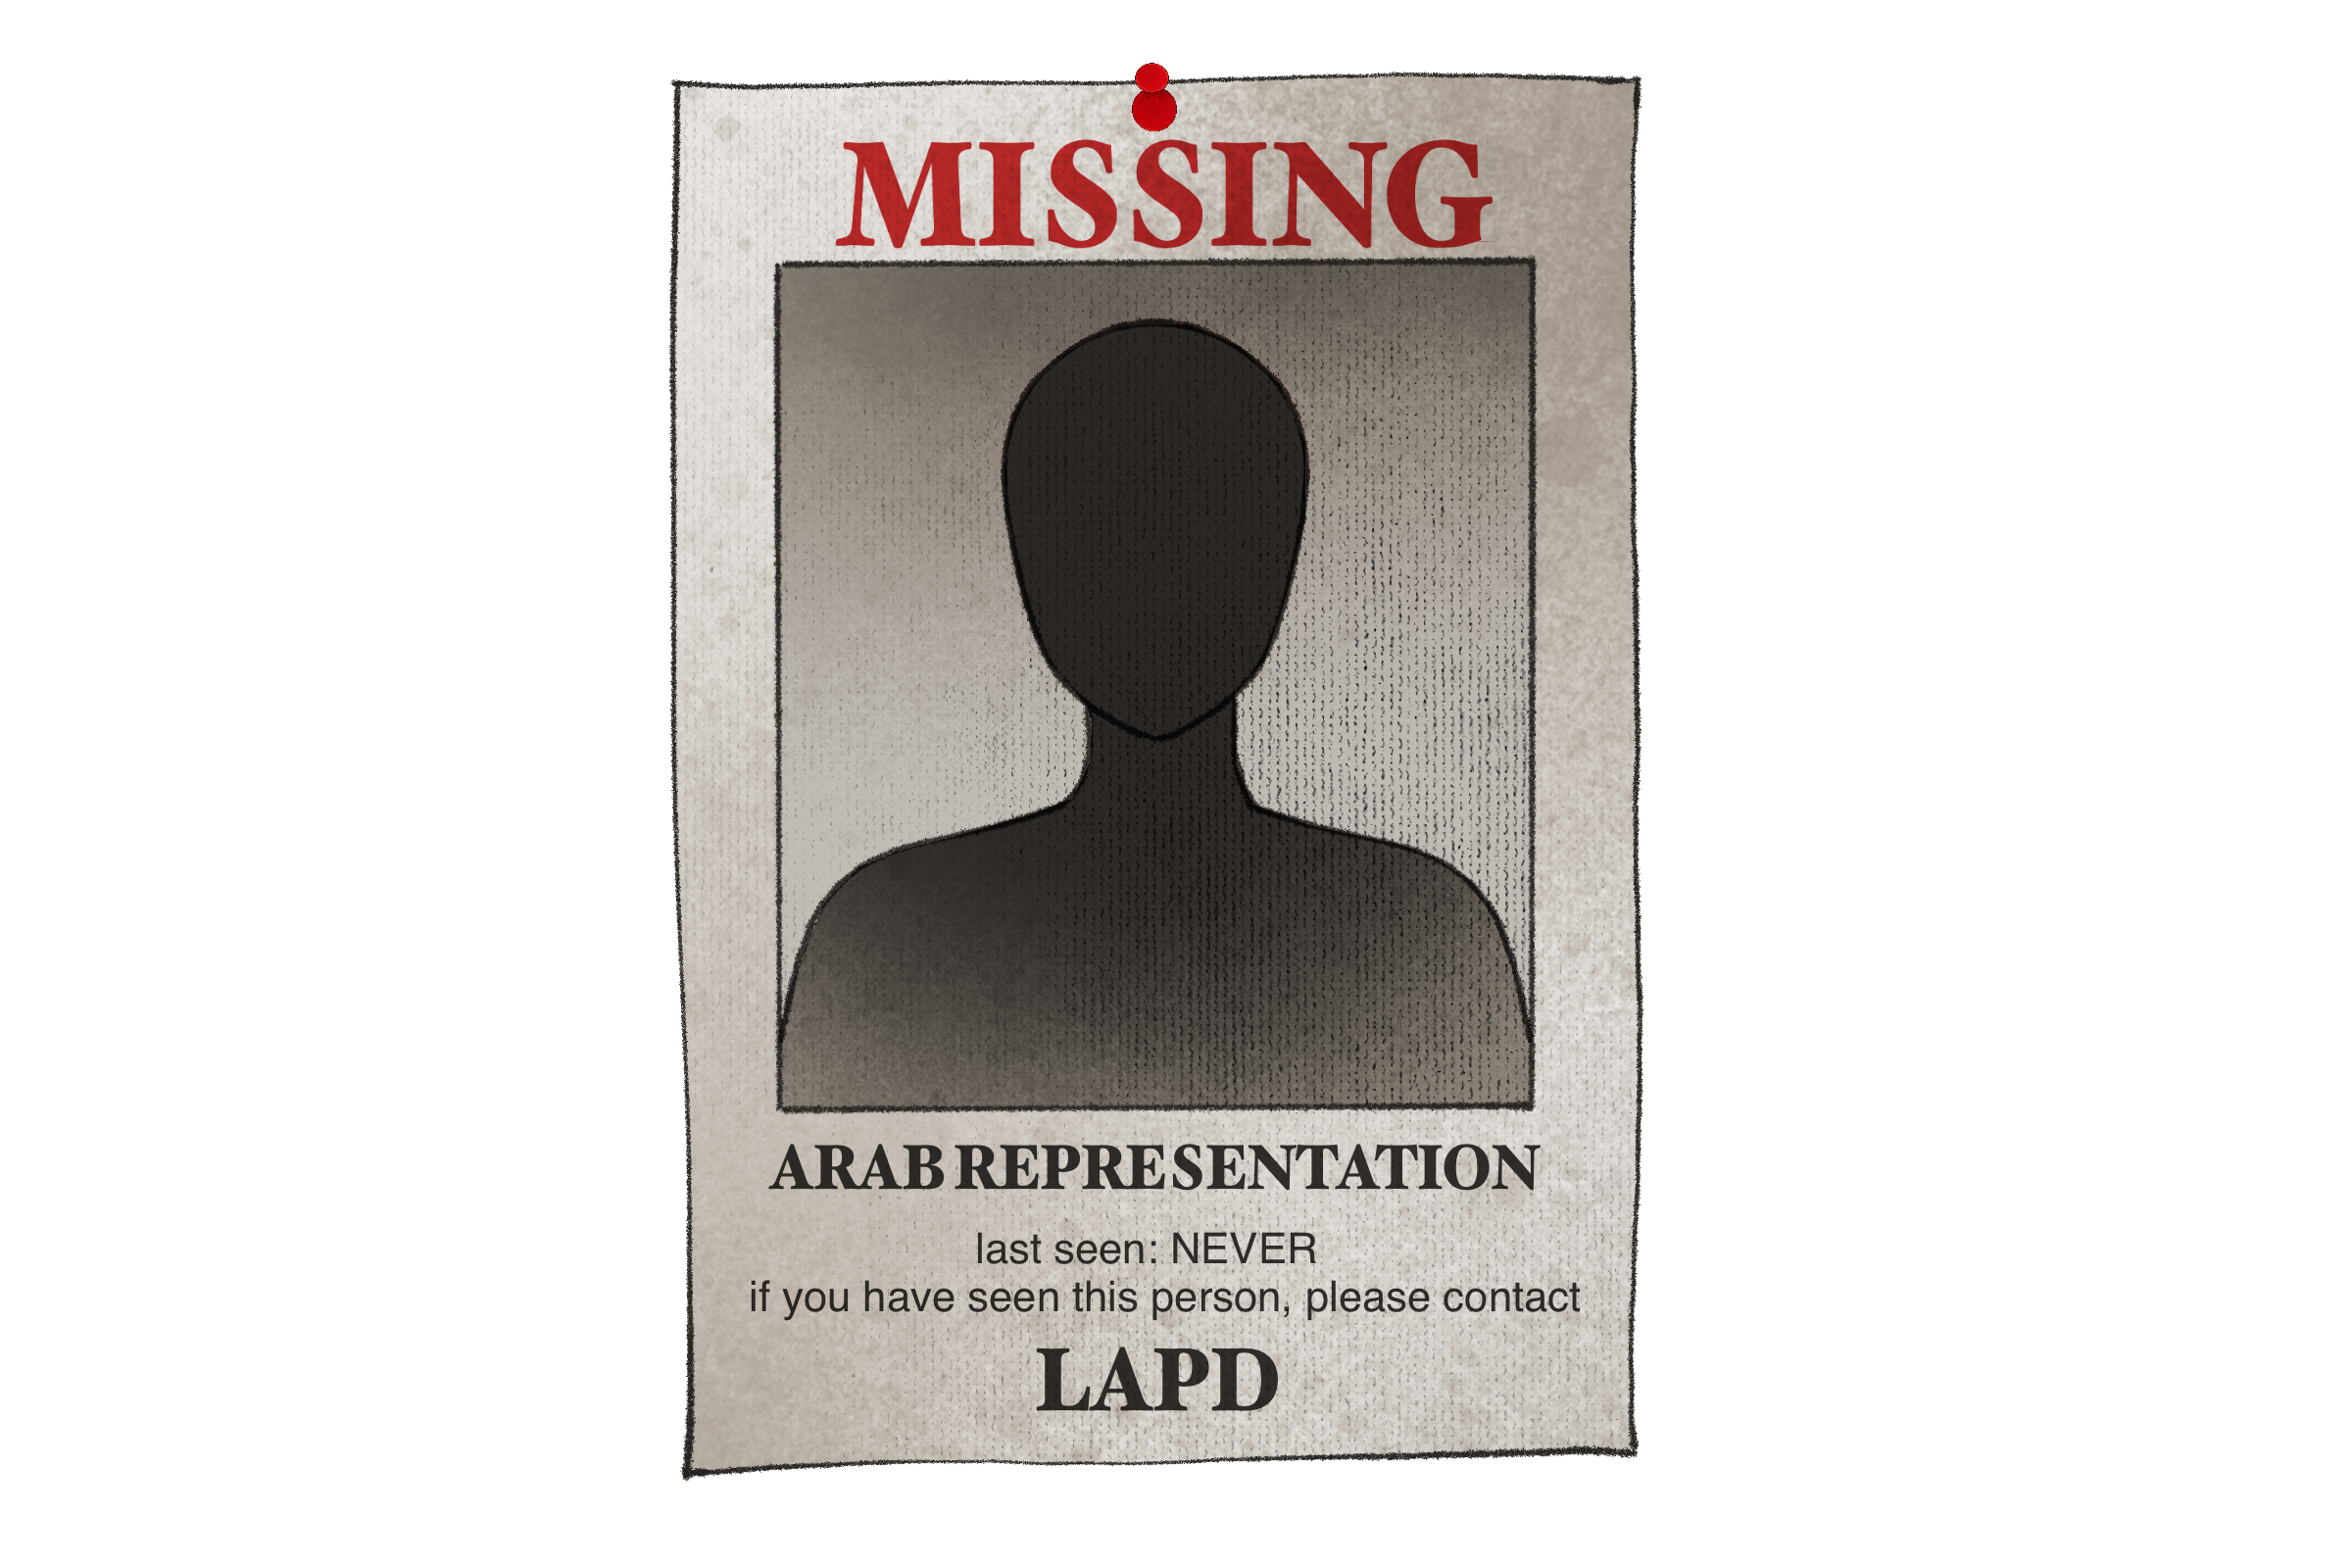 missing person LAPD poster featuring a shadowy silhouette of a person with the caption “Arab Representation” and “last seen: Never”